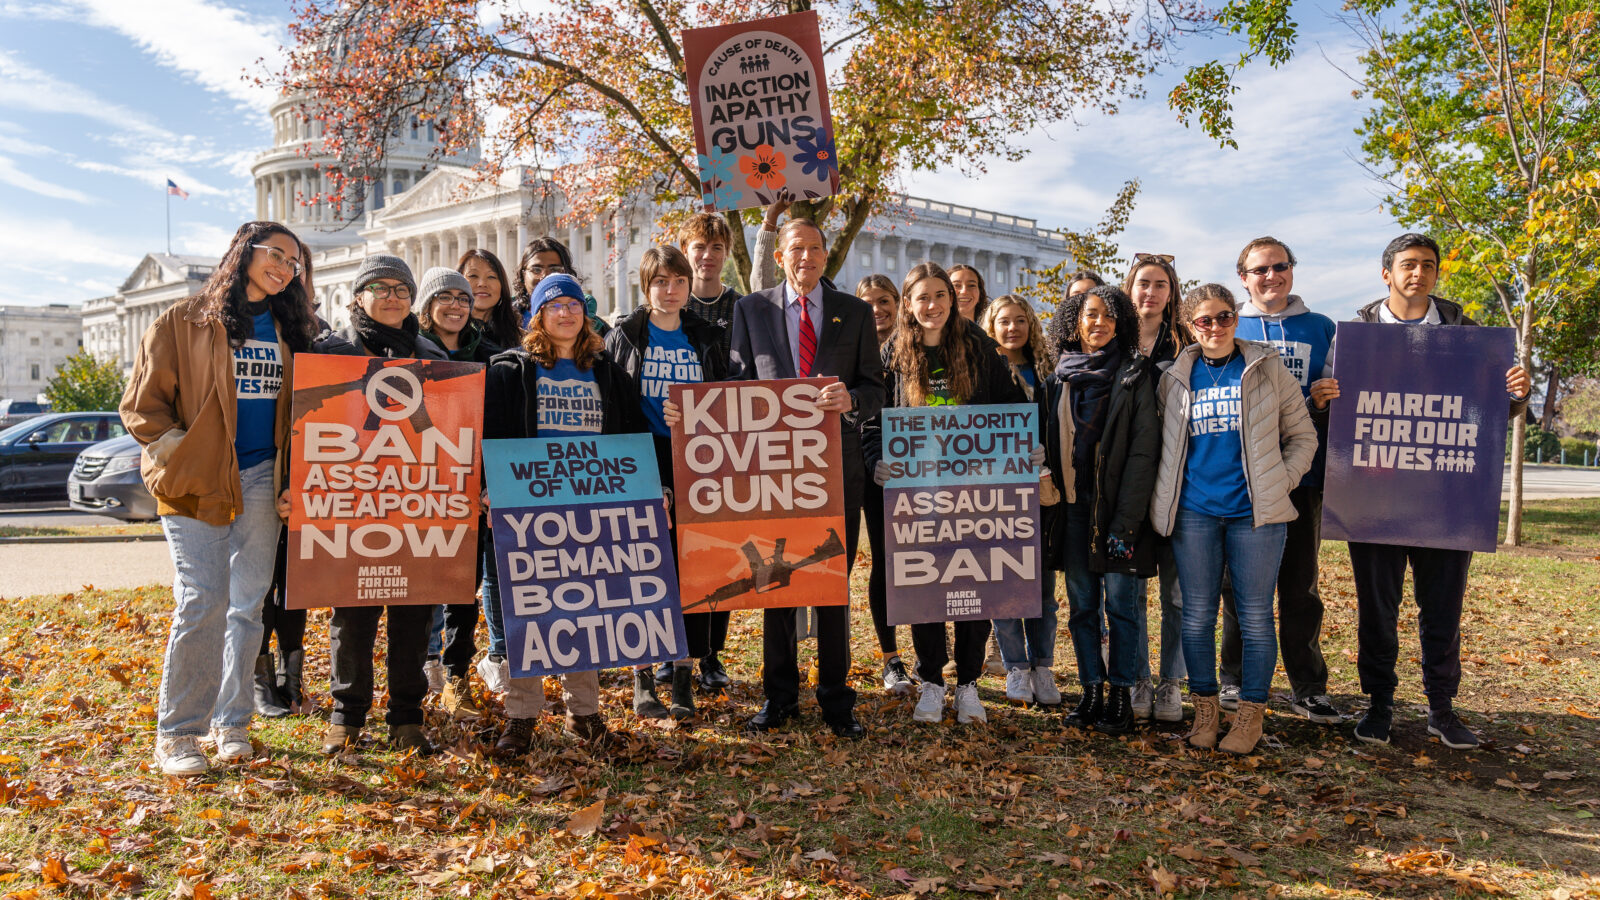 March For Our Lives rallies outside the Capitol to demand an assault weapon ban.